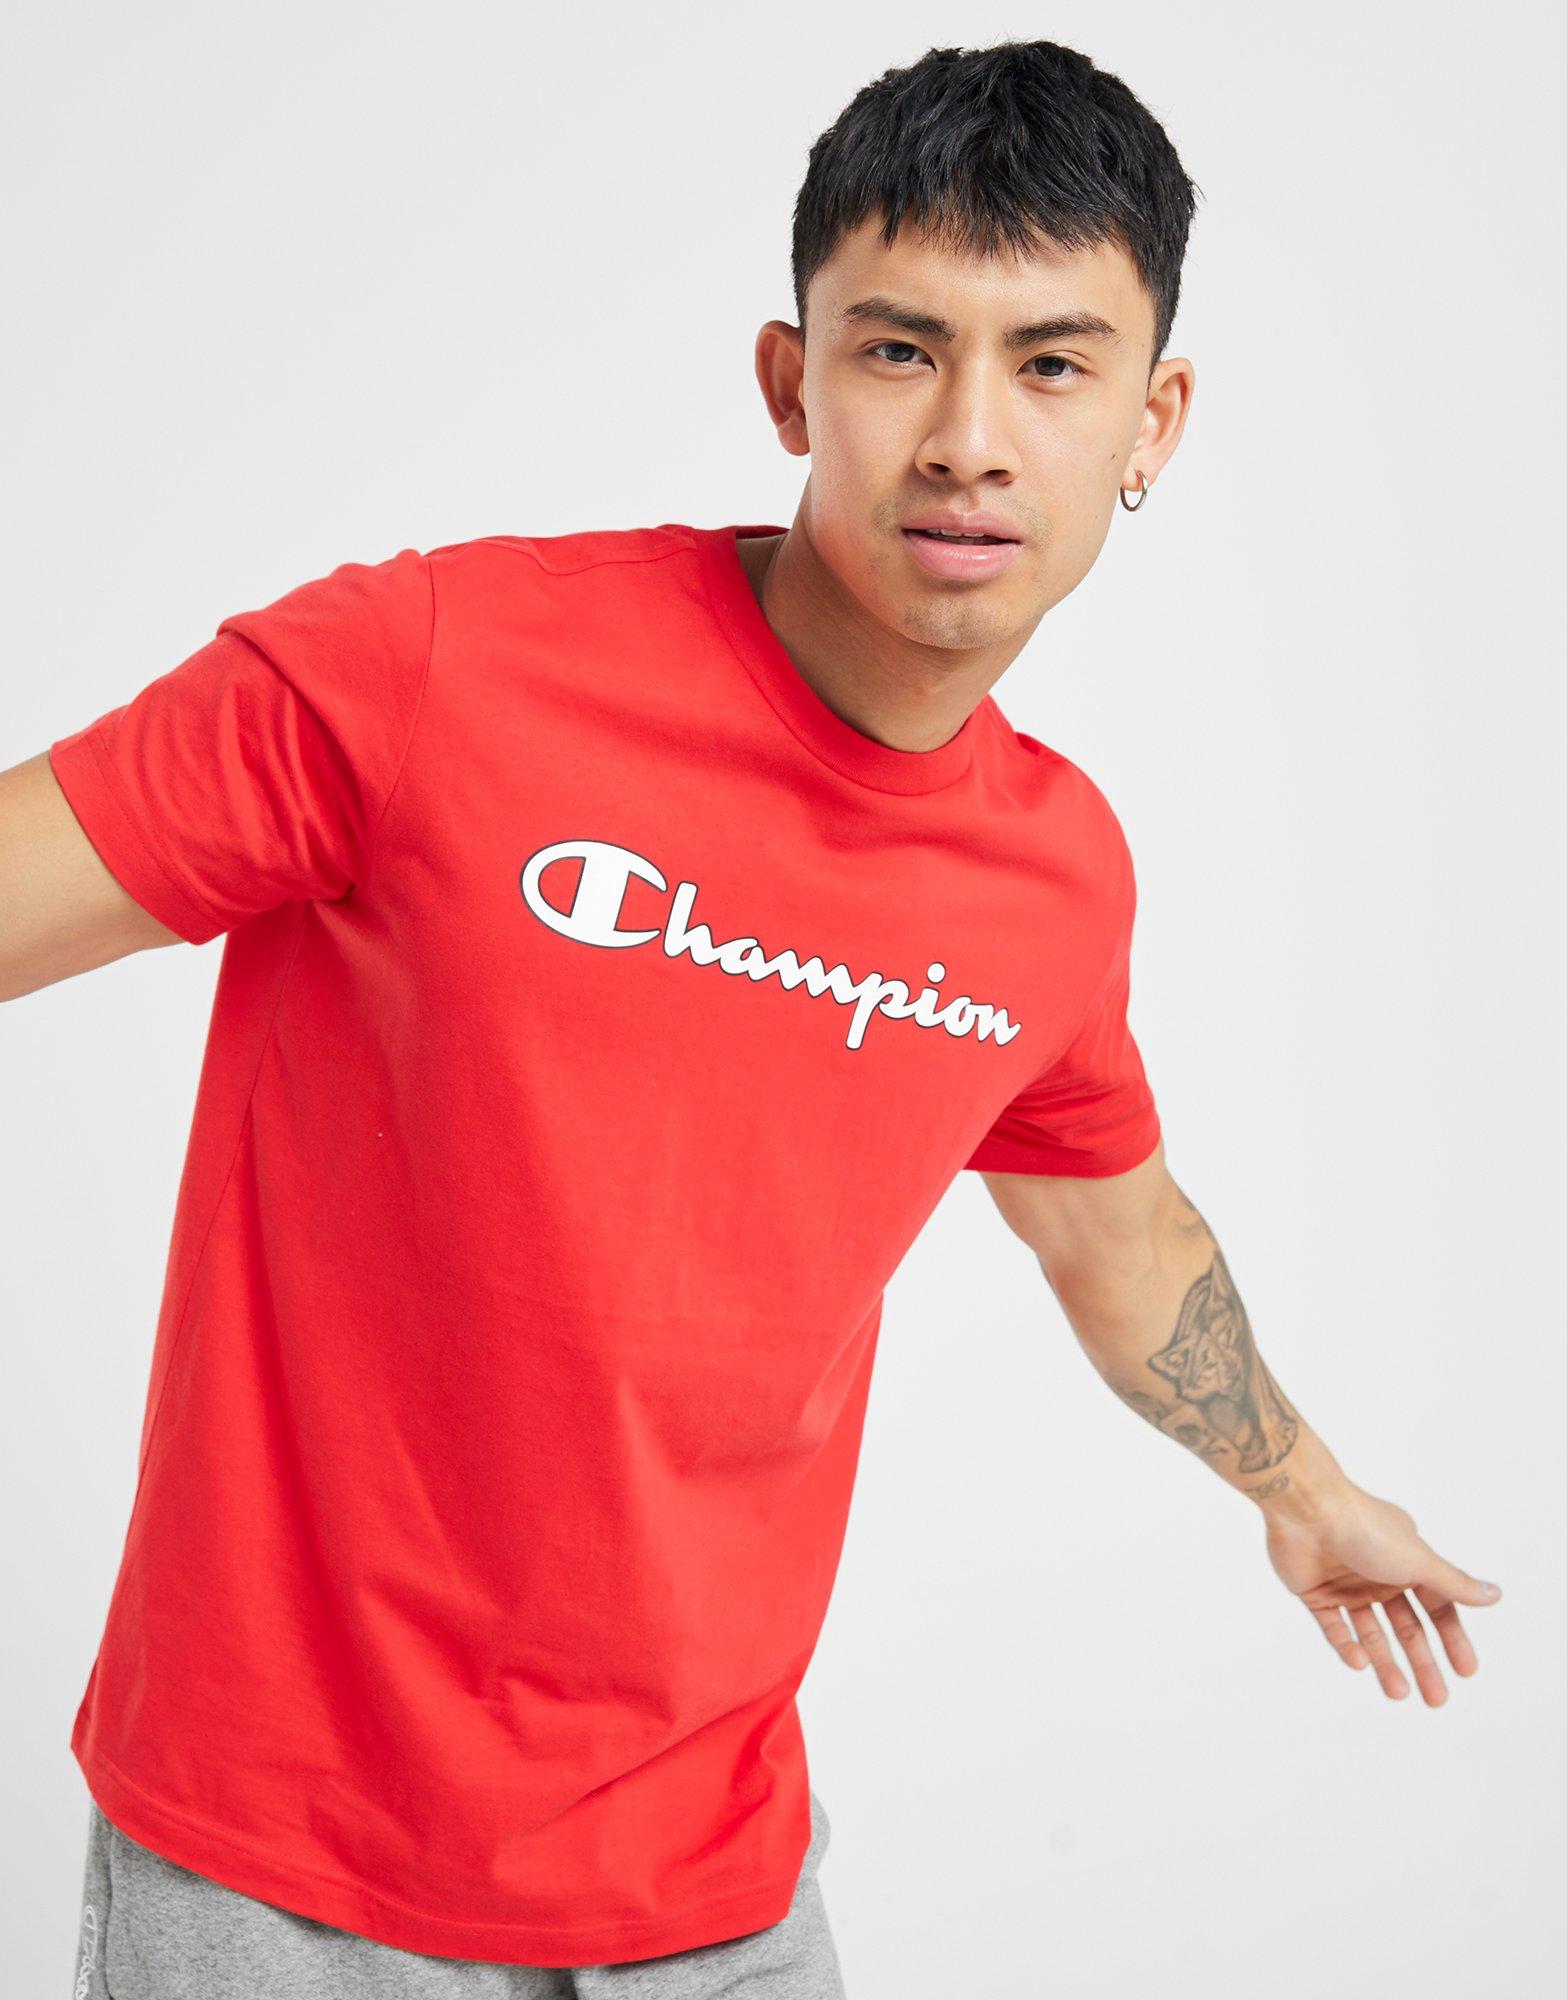 all red champion shirt